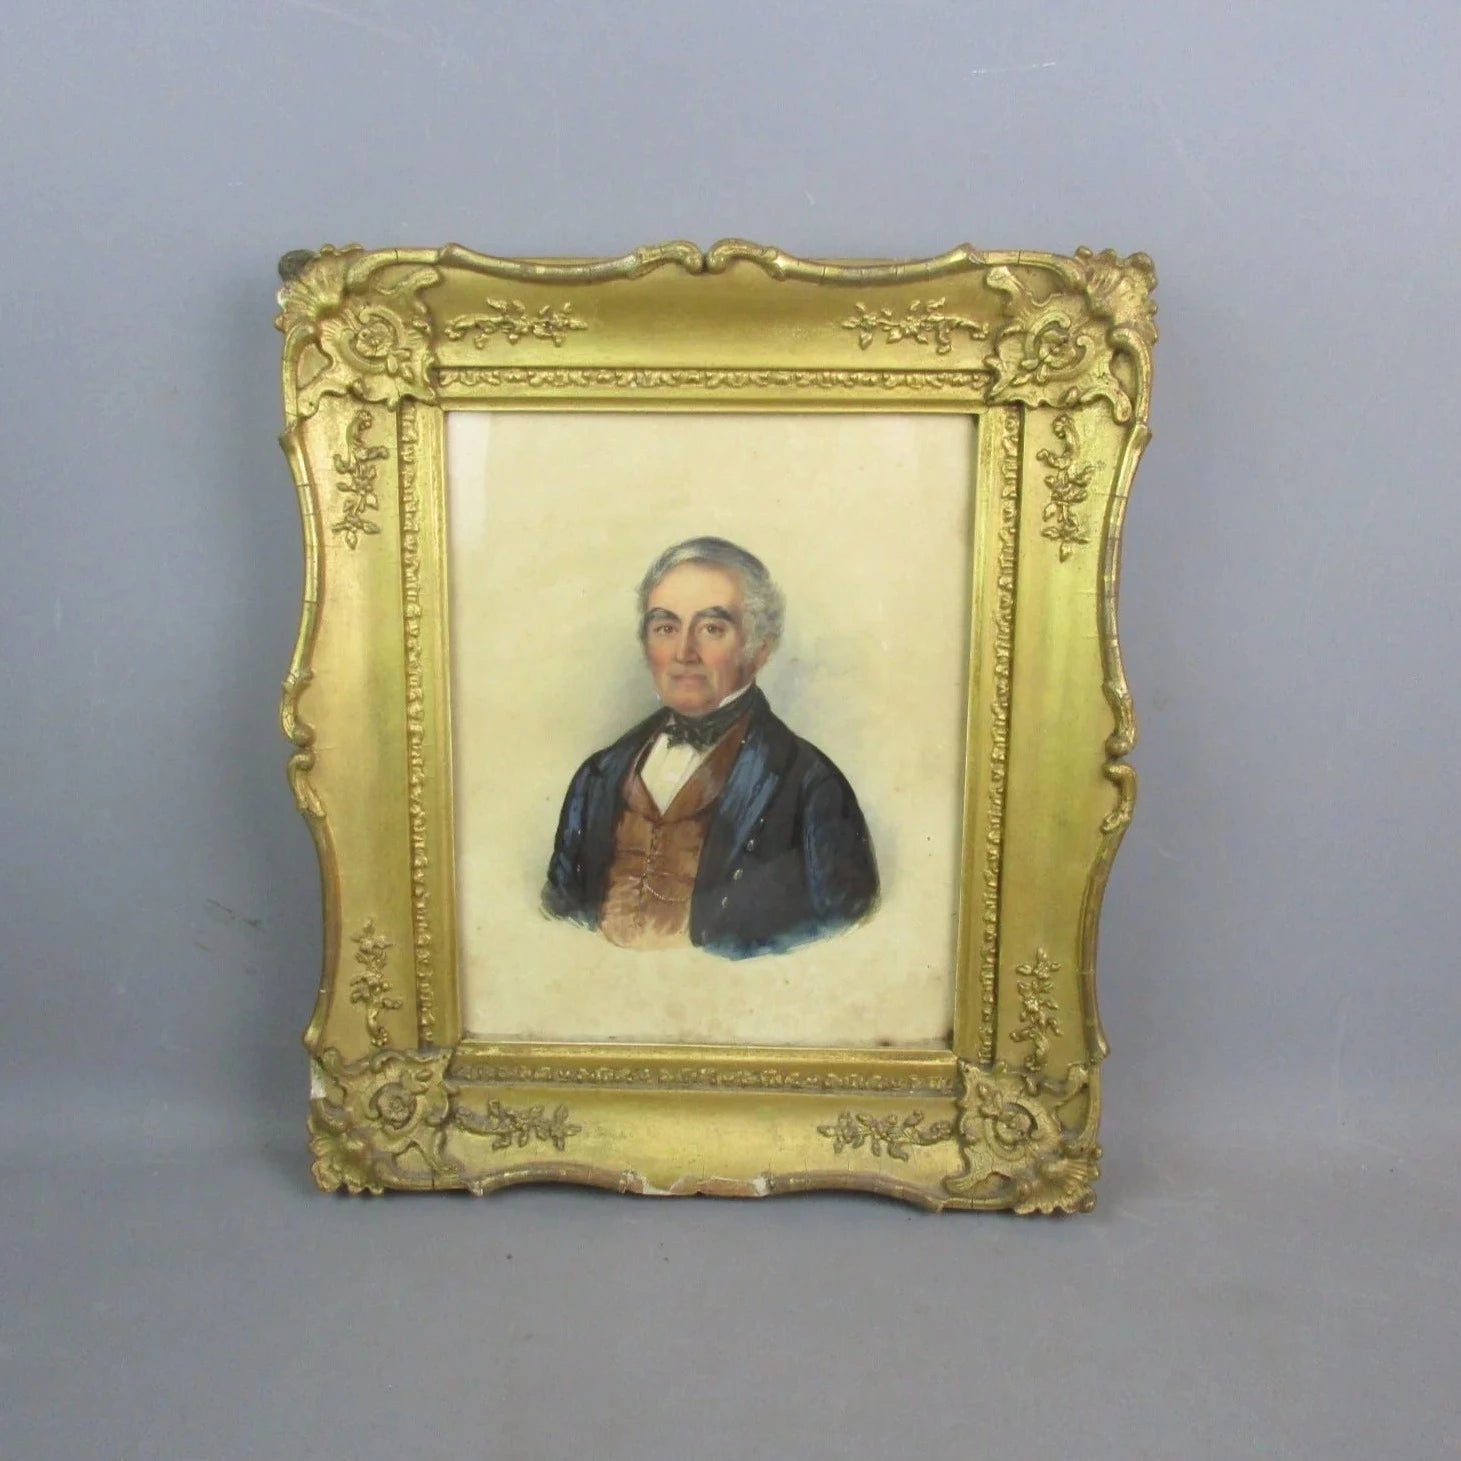 Gold Rococo Framed Watercolour Portrait Painting Of Gentleman Antique Victorian c1860